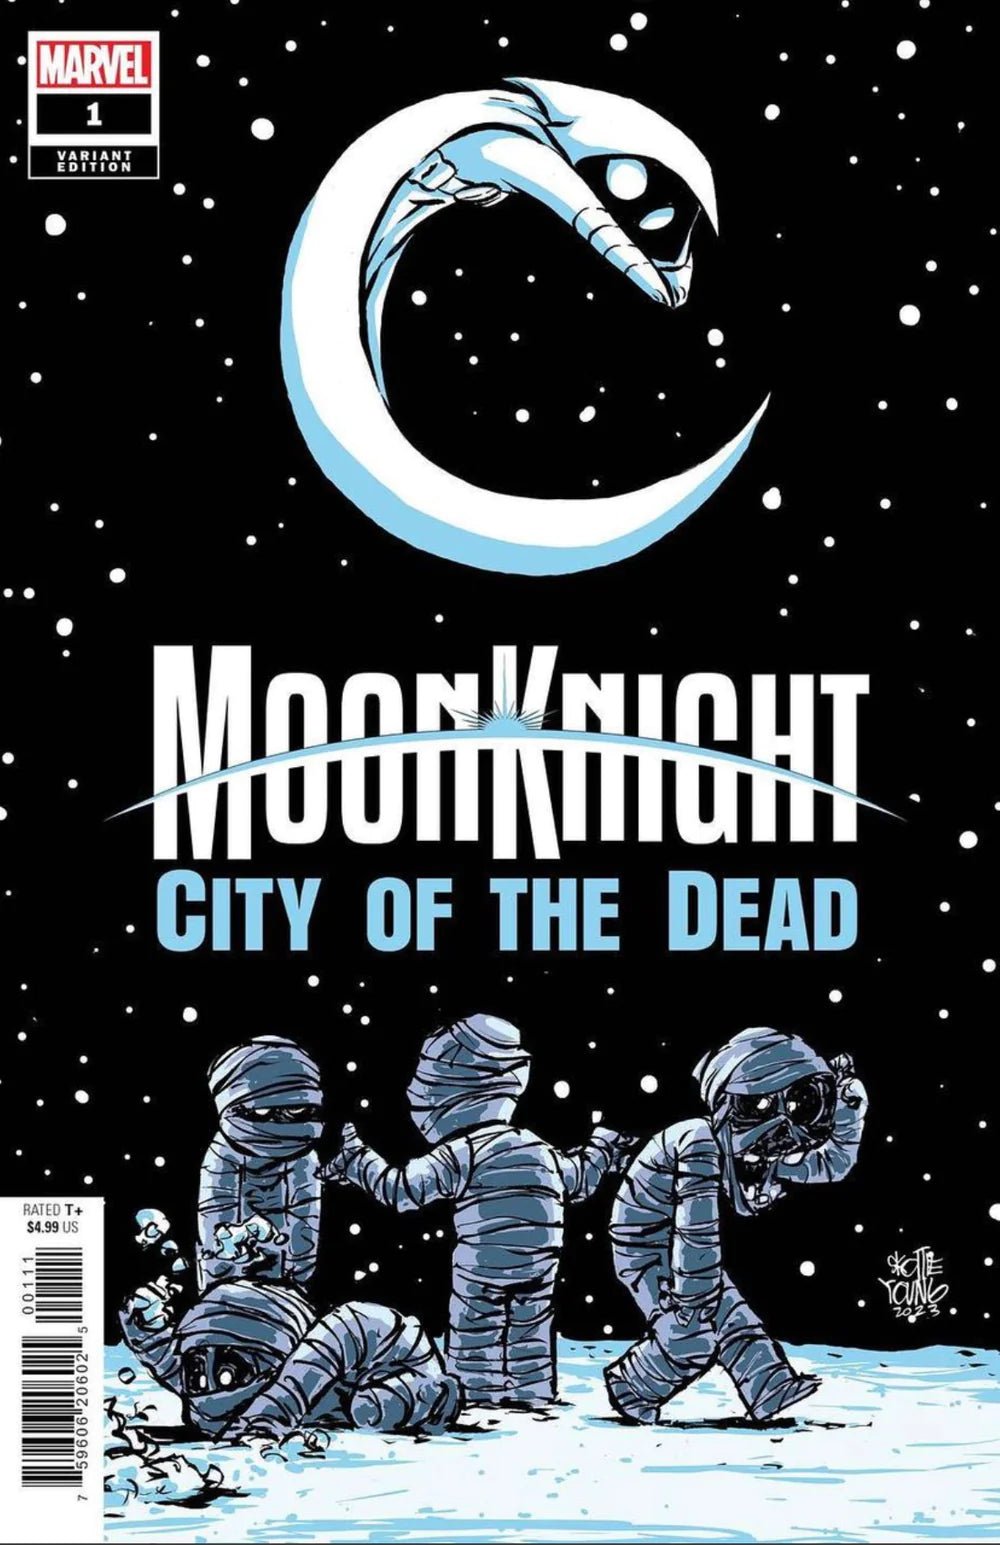 MOON KNIGHT CITY OF THE DEAD #1 (OF 5) SKOTTIE YOUNG VAR - FURYCOMIX